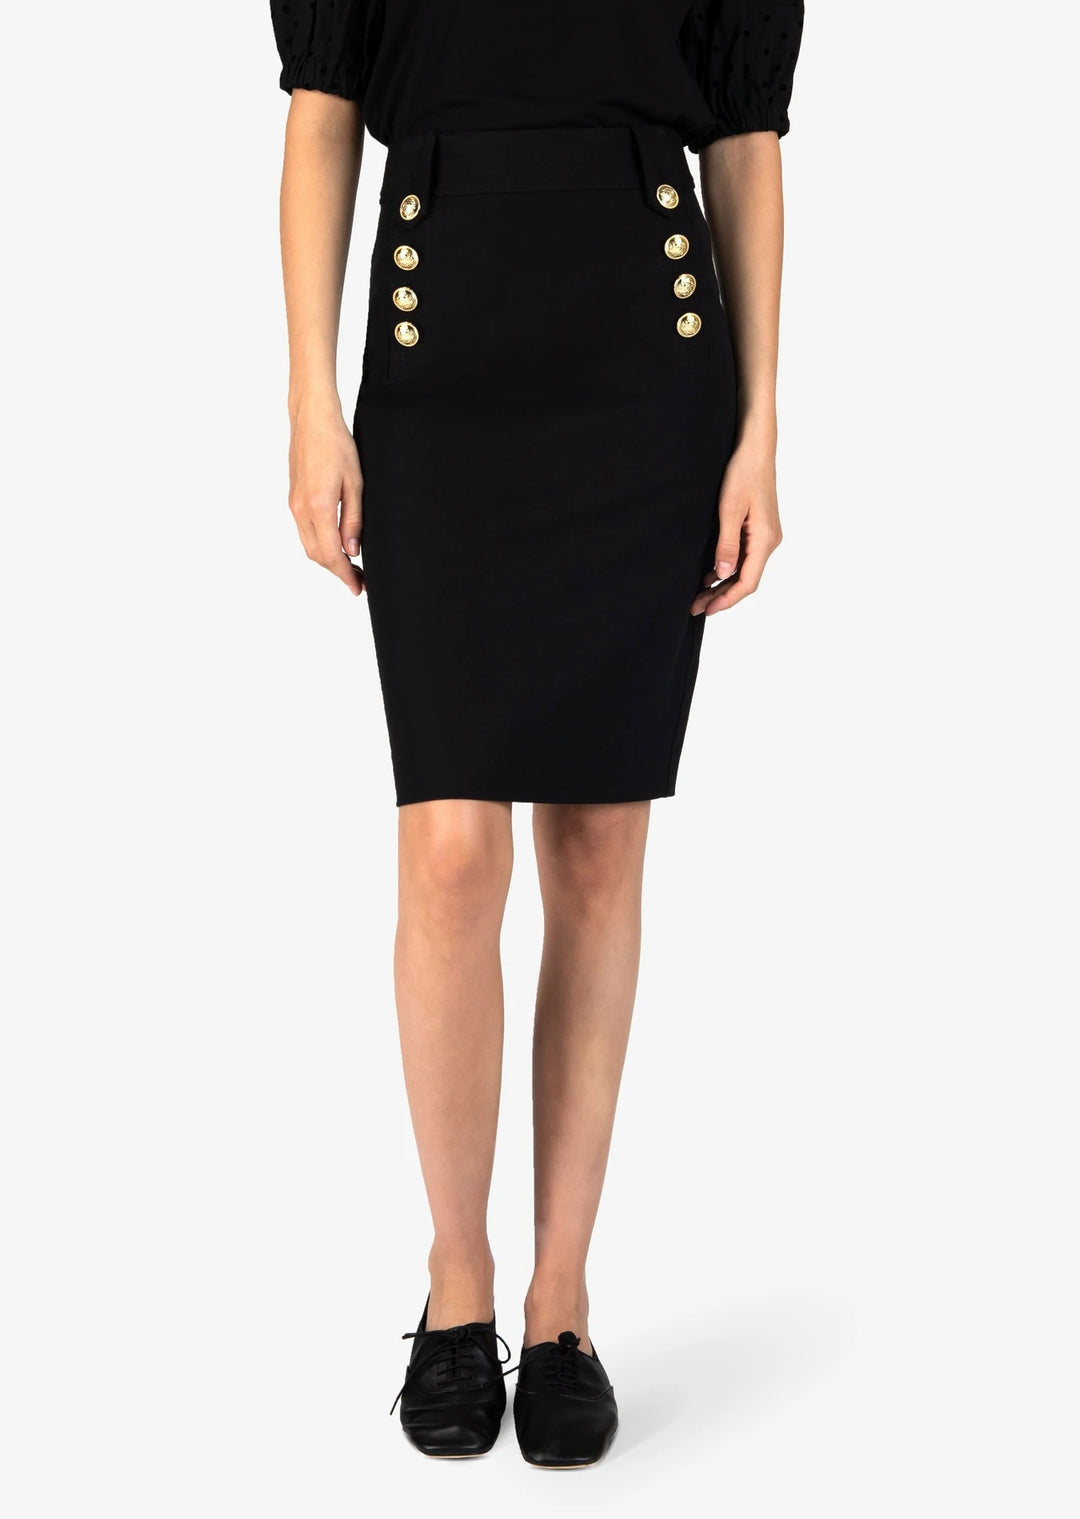 Derek Lam 10 Crosby - Lenox Pencil Skirt with Sailor Buttons in Black